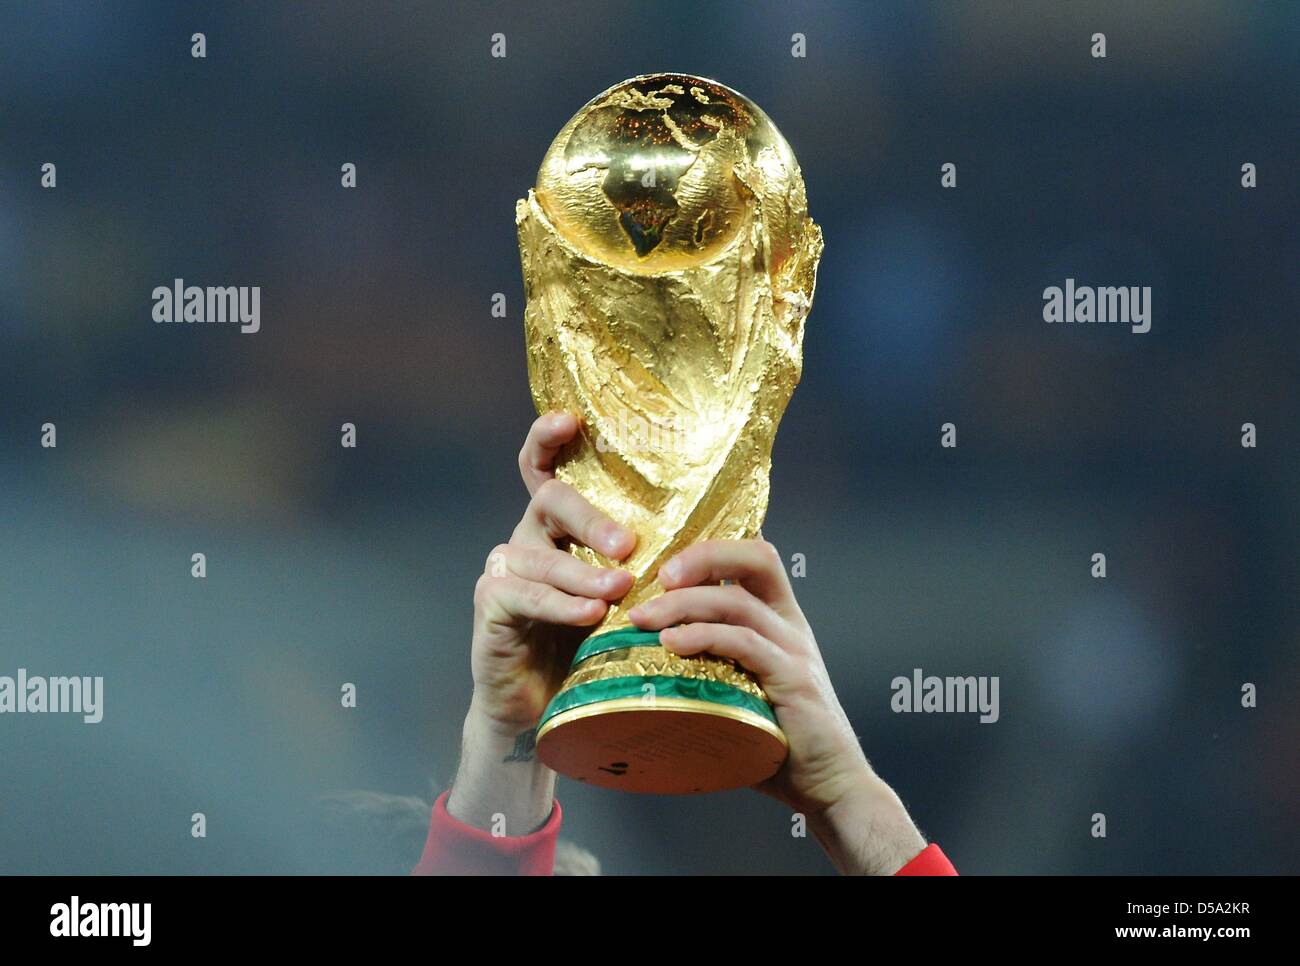 The World Cup trophy is lifted after the 2010 FIFA World Cup final match between the Netherlands and Spain at Soccer City Stadium in Johannesburg, South Africa 11 July 2010. Photo: Marcus Brandt dpa - Please refer to http://dpaq.de/FIFA-WM2010-TC  +++(c) dpa - Bildfunk+++ Stock Photo